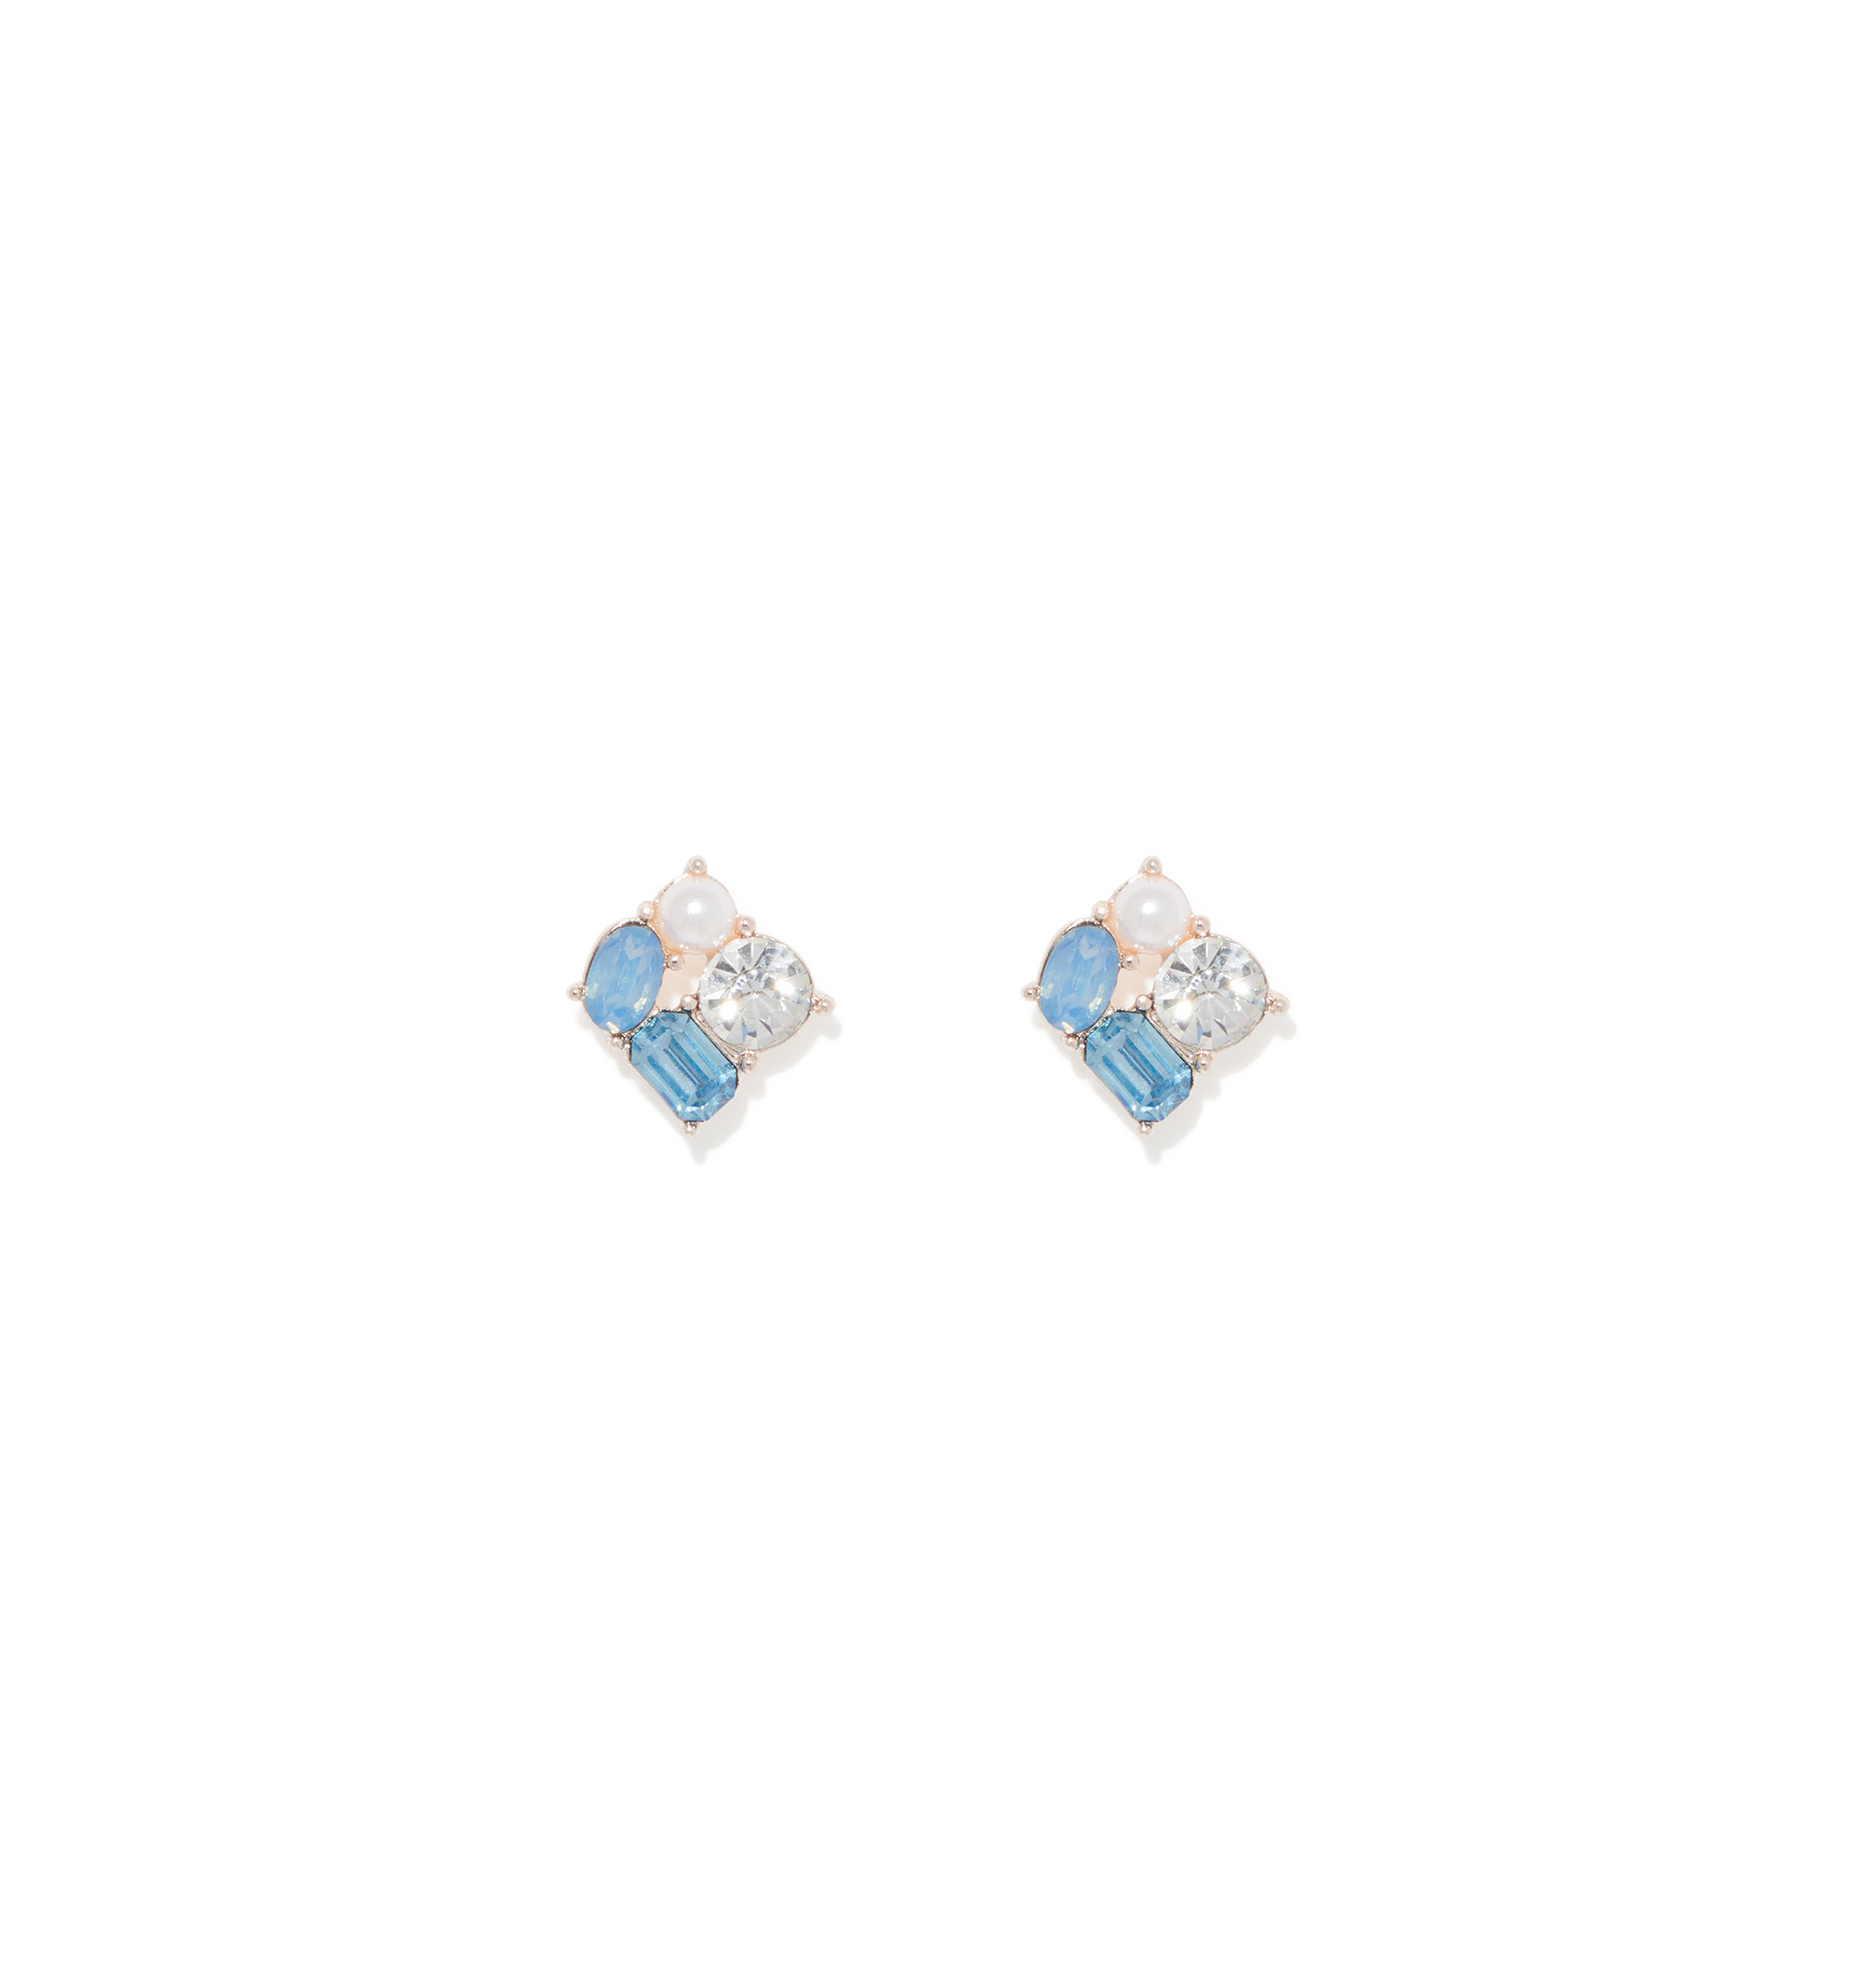 Earrings with aquamarine-coloured stone and star silver | THOMAS SABO